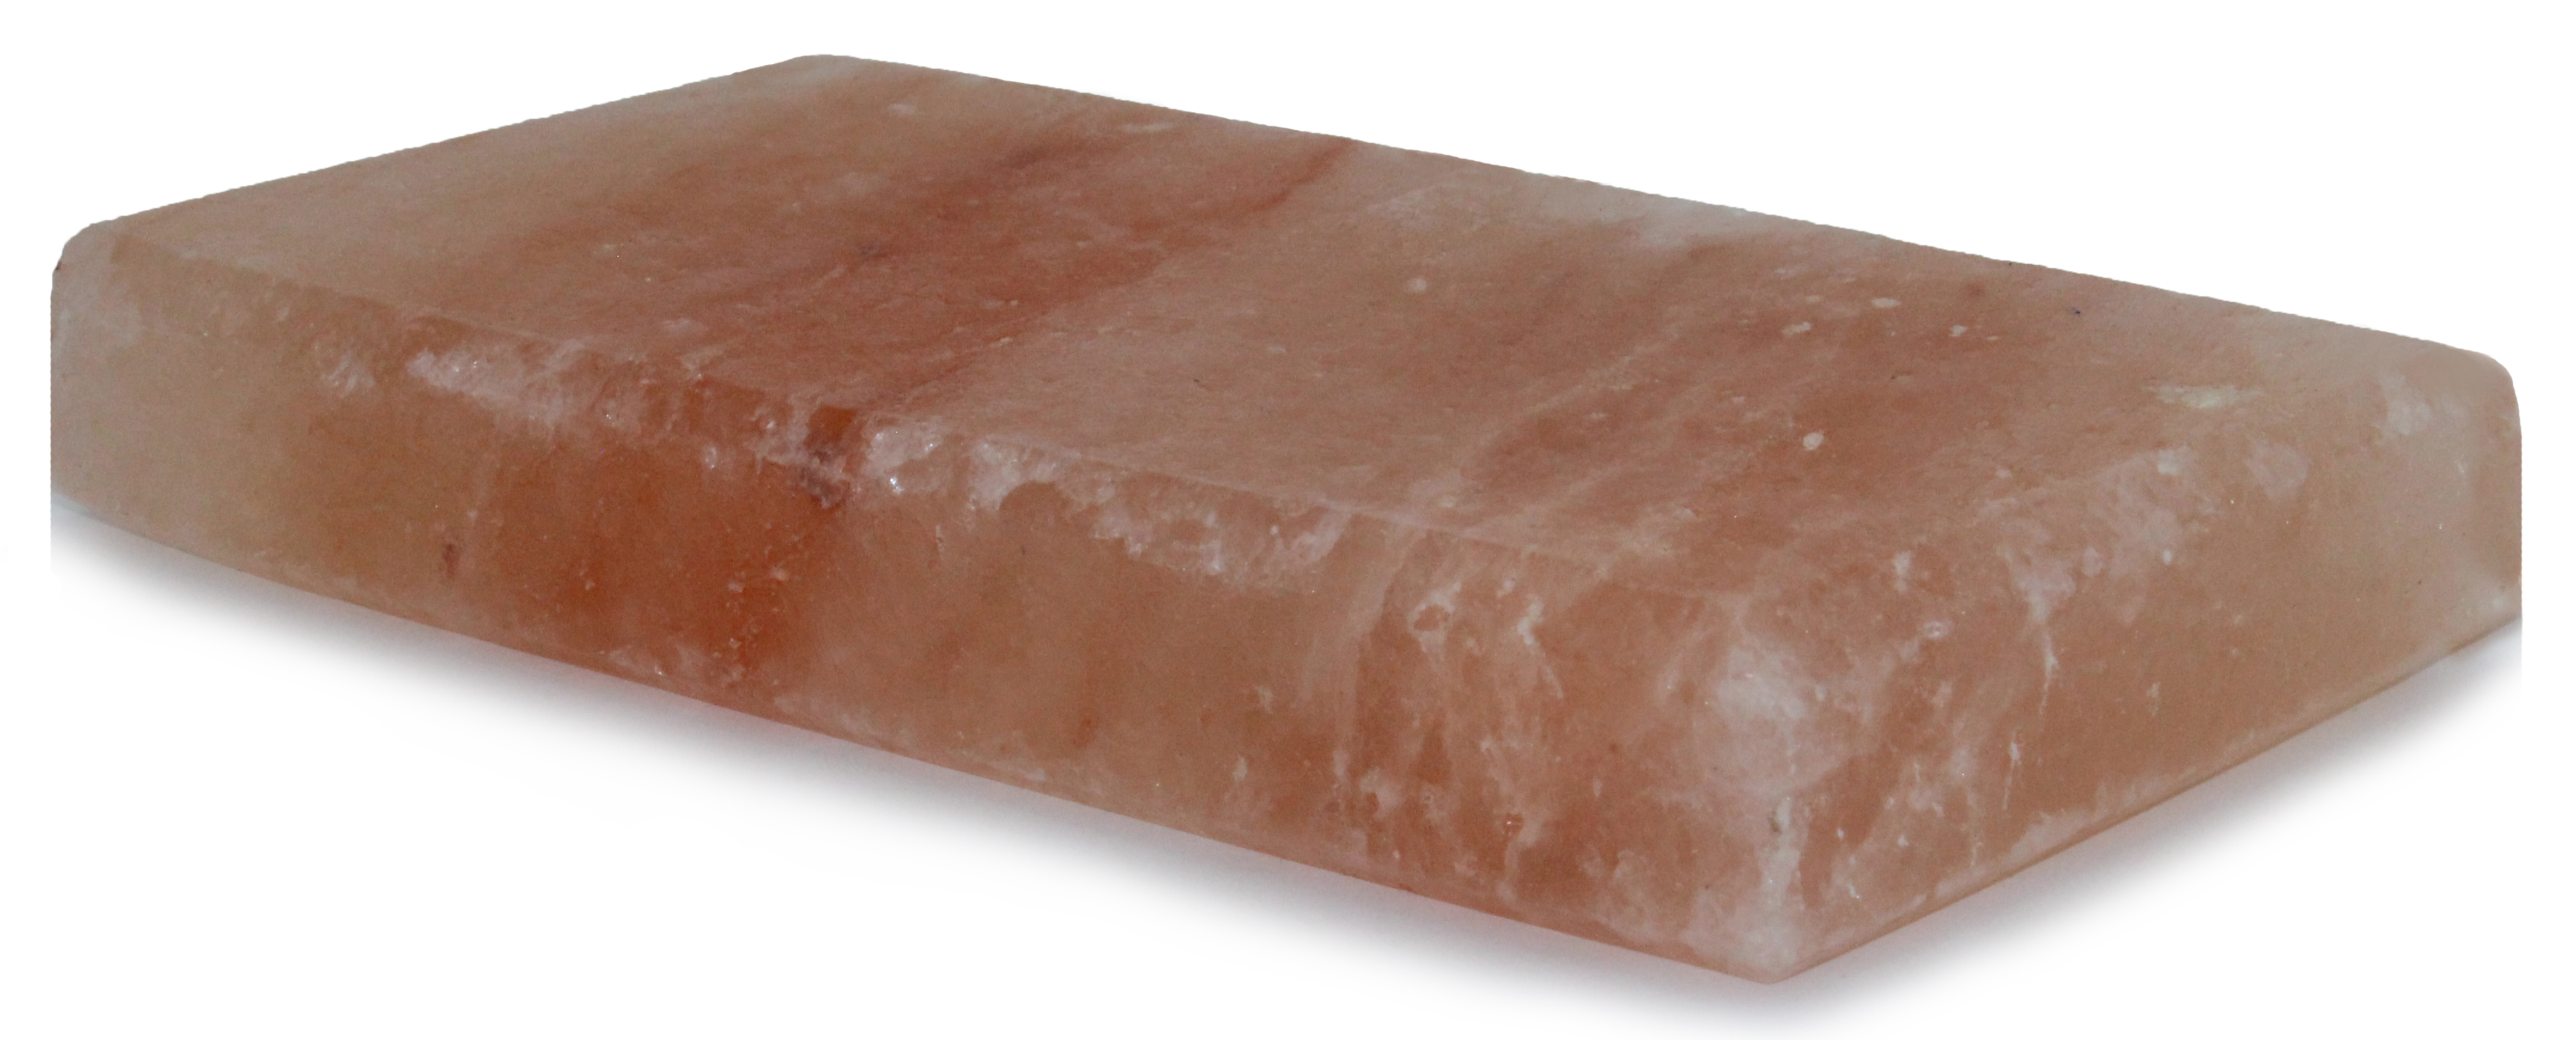 IndusClassic RSP-18 Himalayan Salt Block, Plate, Slab for Cooking, Grilling, Seasoning, And Serving (8 X 4 X 1) - image 1 of 3